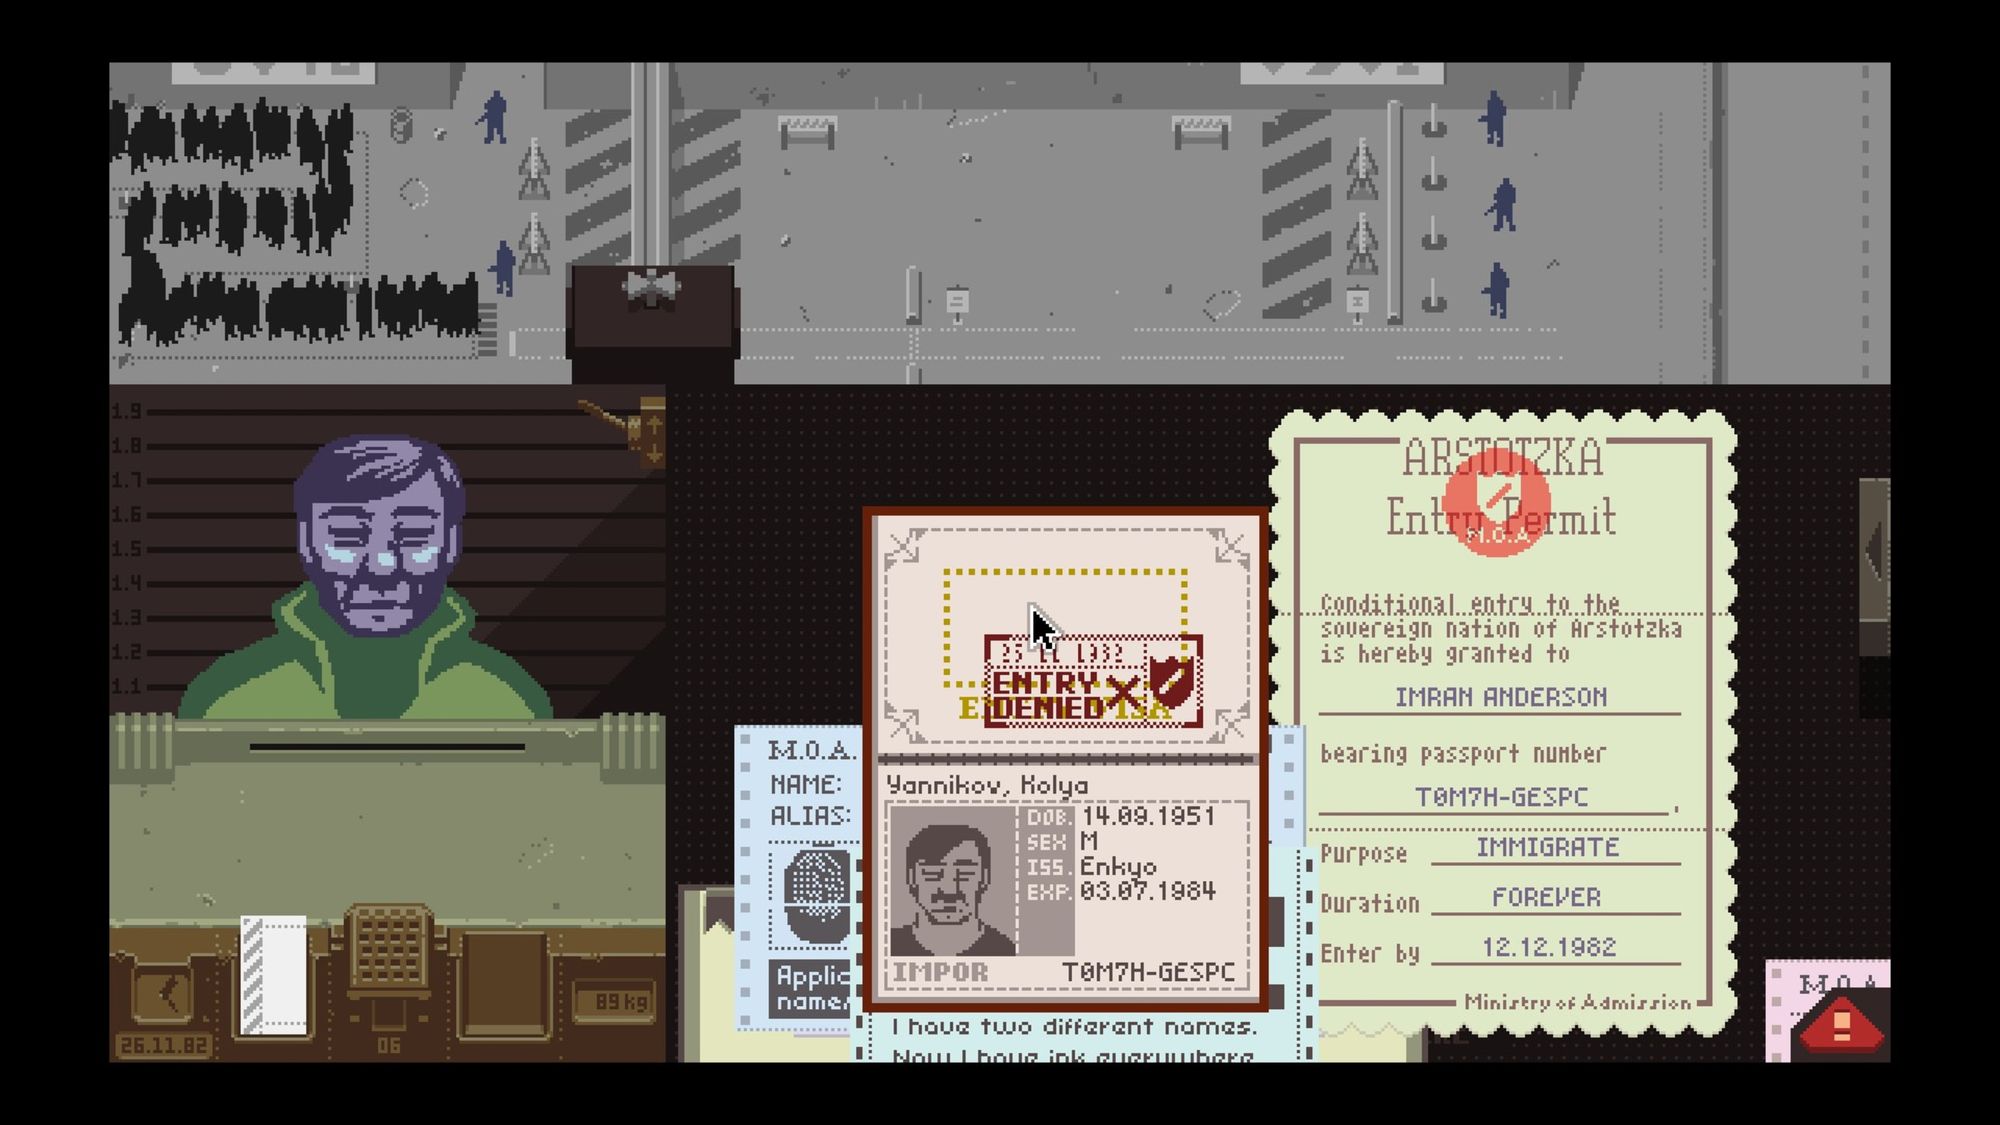 That s not my neighbor papers please. Карта из игры papers please. Papers please Джорджи Костава. Код для бесконечной игры в papers please. Papers please-русское сообщество.